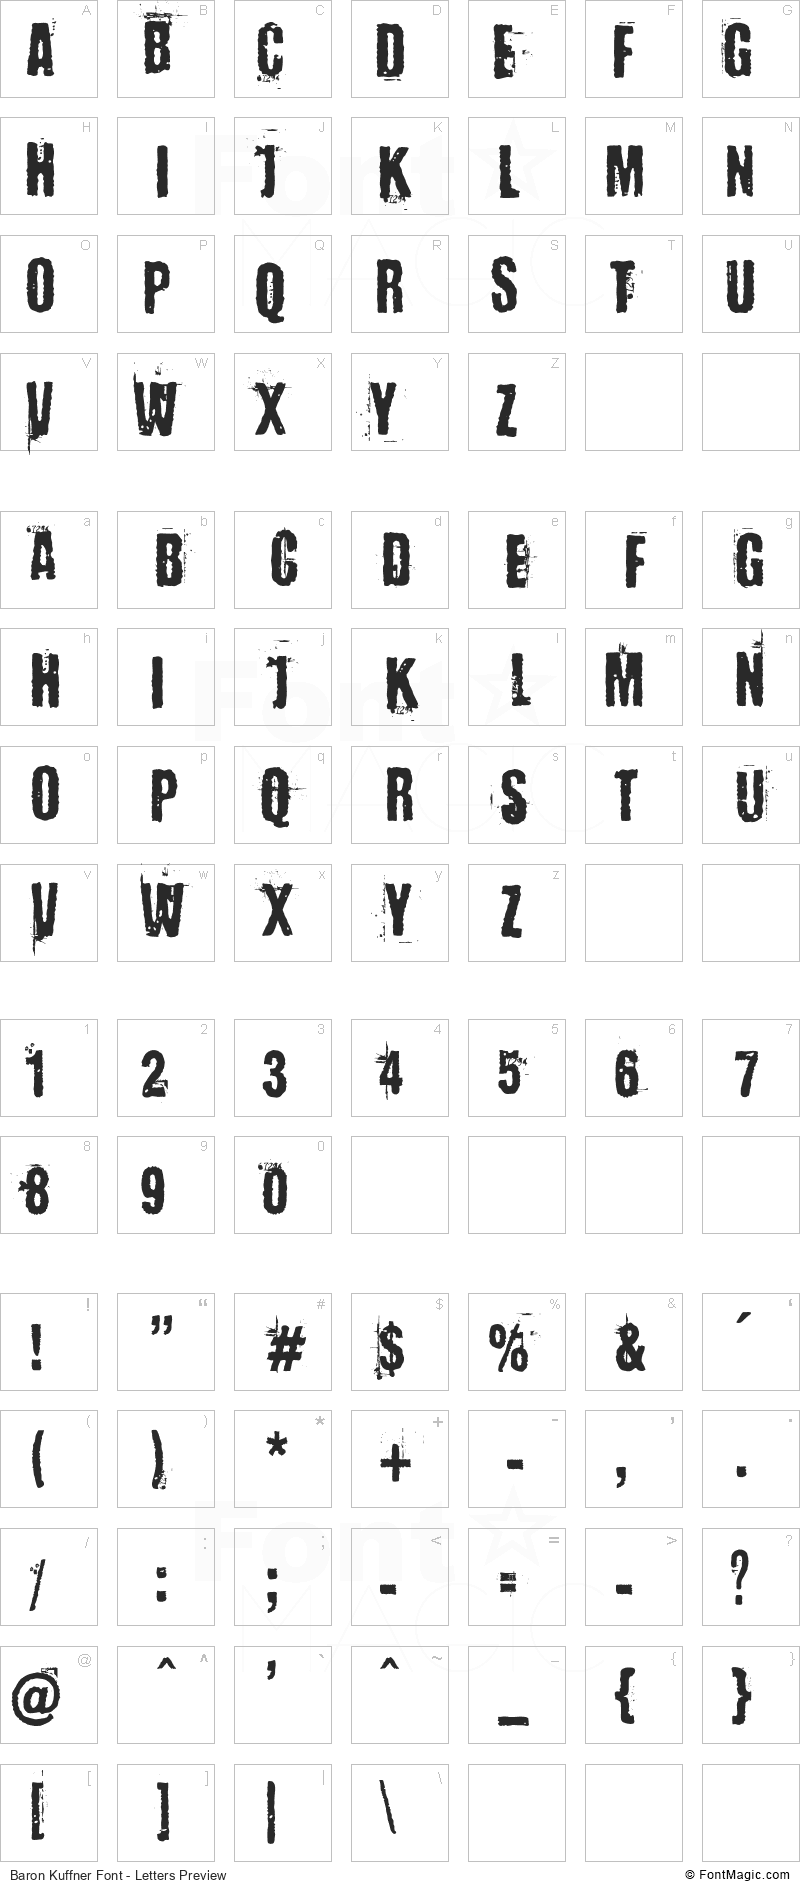 Baron Kuffner Font - All Latters Preview Chart